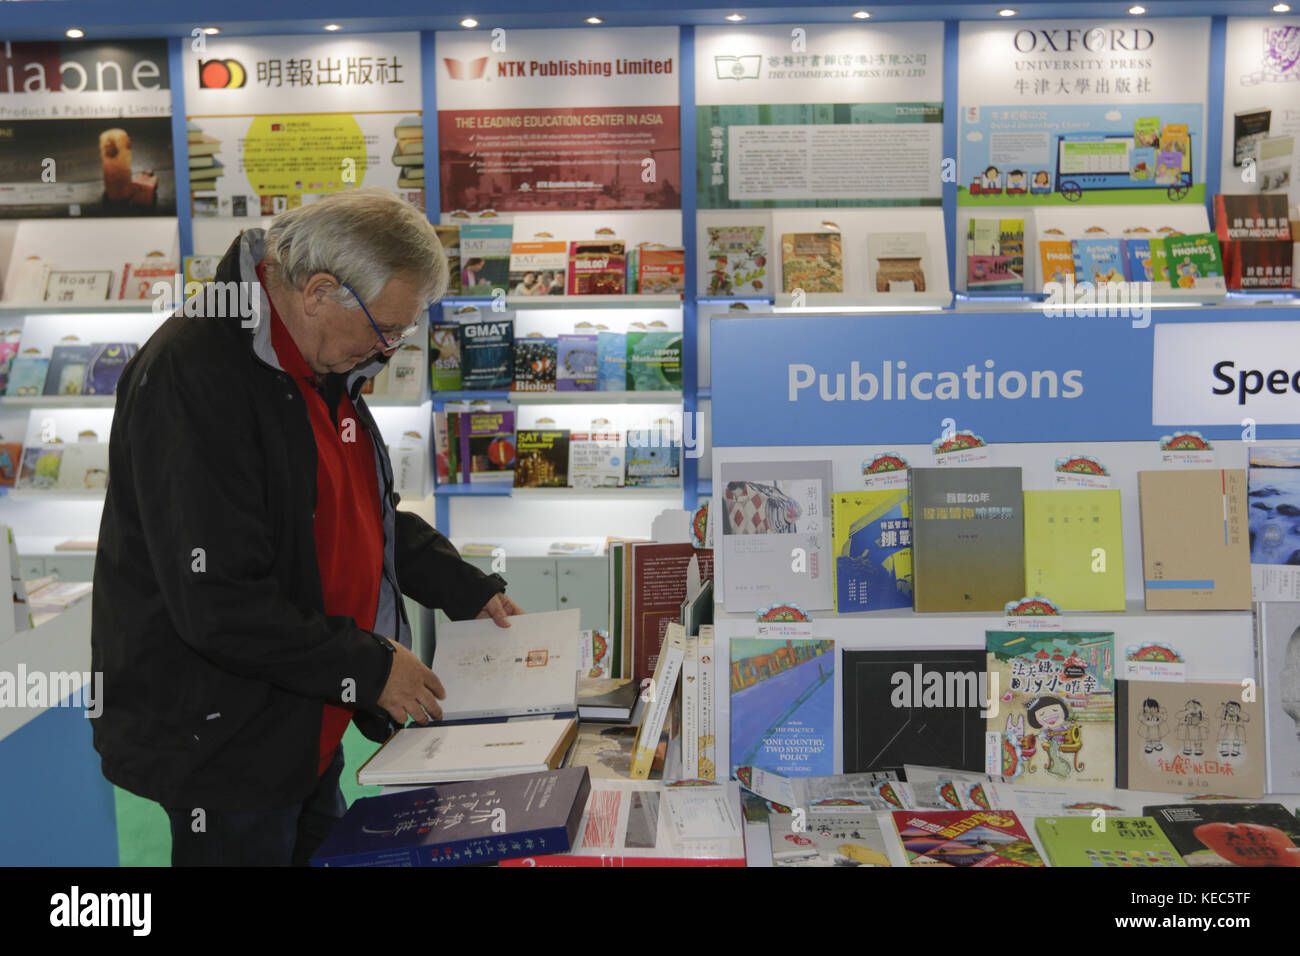 Frankfurt, Hesse, Germany. 13th Oct, 2017. A visitor looks at books at the Hong Kong pavilion at the Frankfurt Book Fair. The Frankfurt Book Fair 2017 is the world largest book fair with over 7,000 exhibitors and over 250,000 expected visitors. It is open from the 11th to the 15th October with the last two days being open to the general public. Credit: Michael Debets/SOPA/ZUMA Wire/Alamy Live News Stock Photo